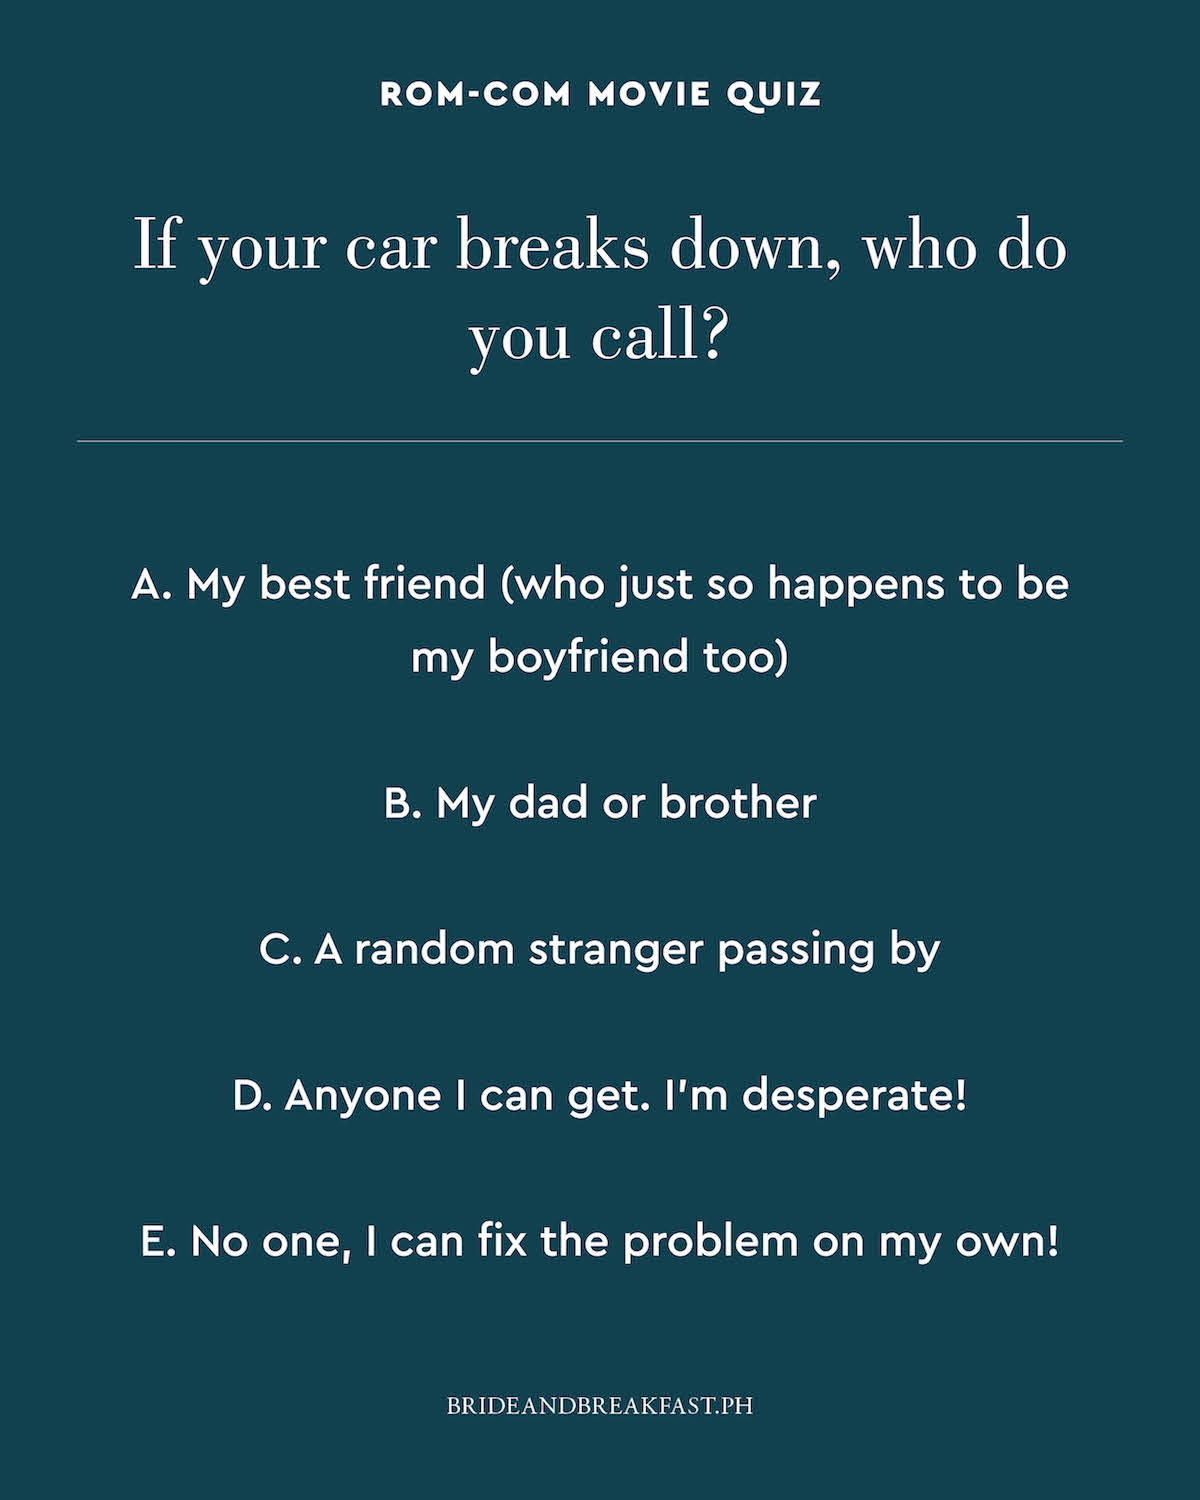 If your car breaks down, who do you call? A. My best friend (who just so happens to be my boyfriend too) B. My dad or brother C. A random stranger passing by D. Anyone I can get. I'm desperate! E. No one, I can fix the problem on my own!